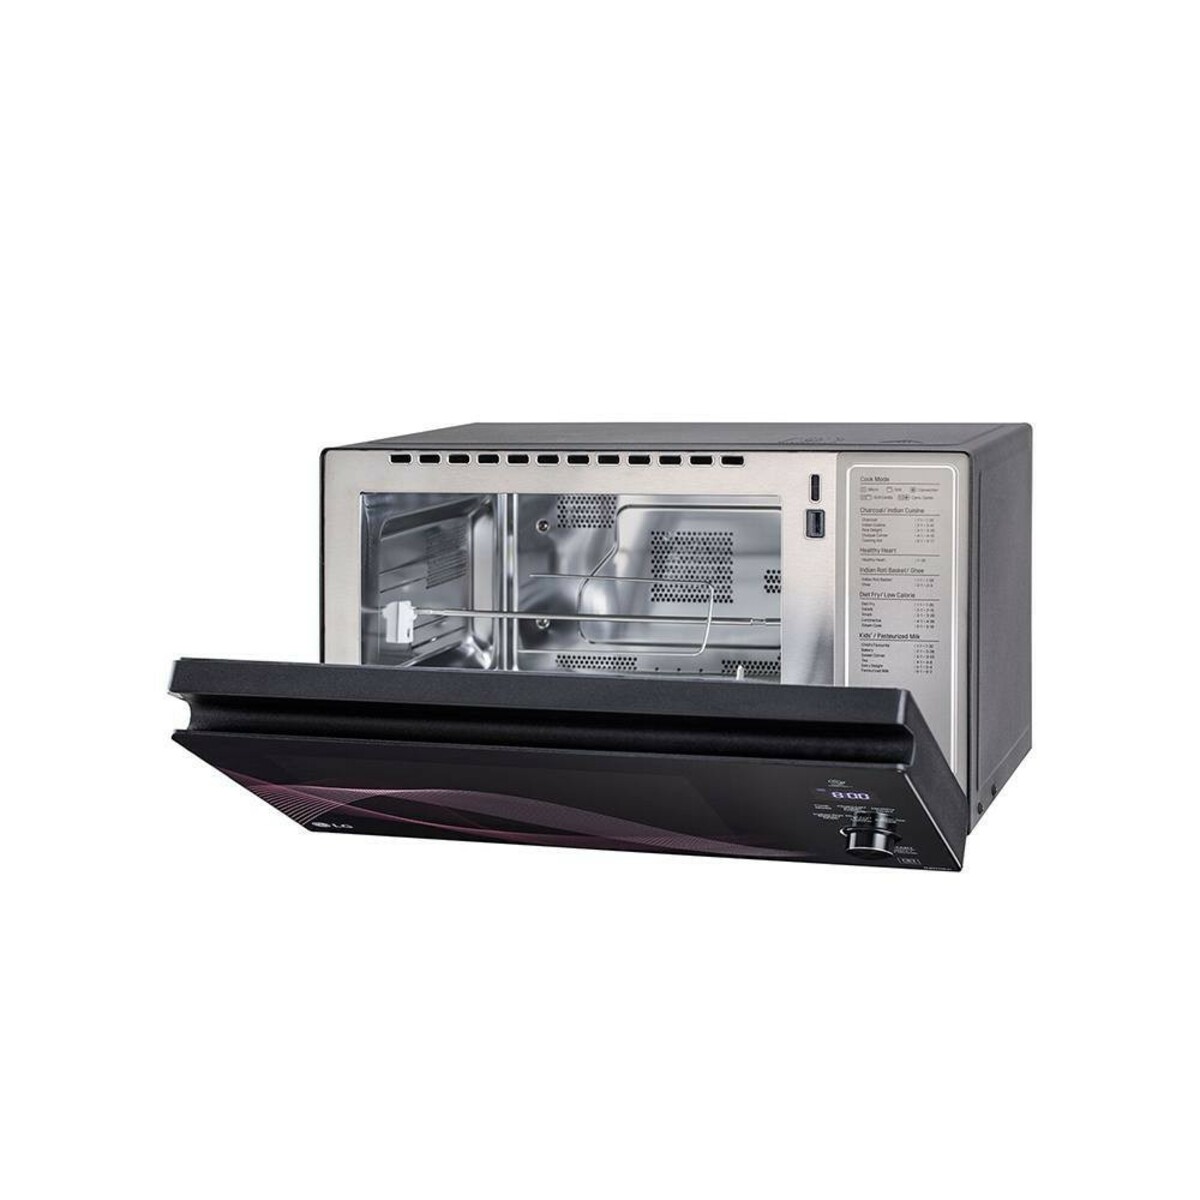 LG Microwave Oven All In One MJEN326UH 32Ltr